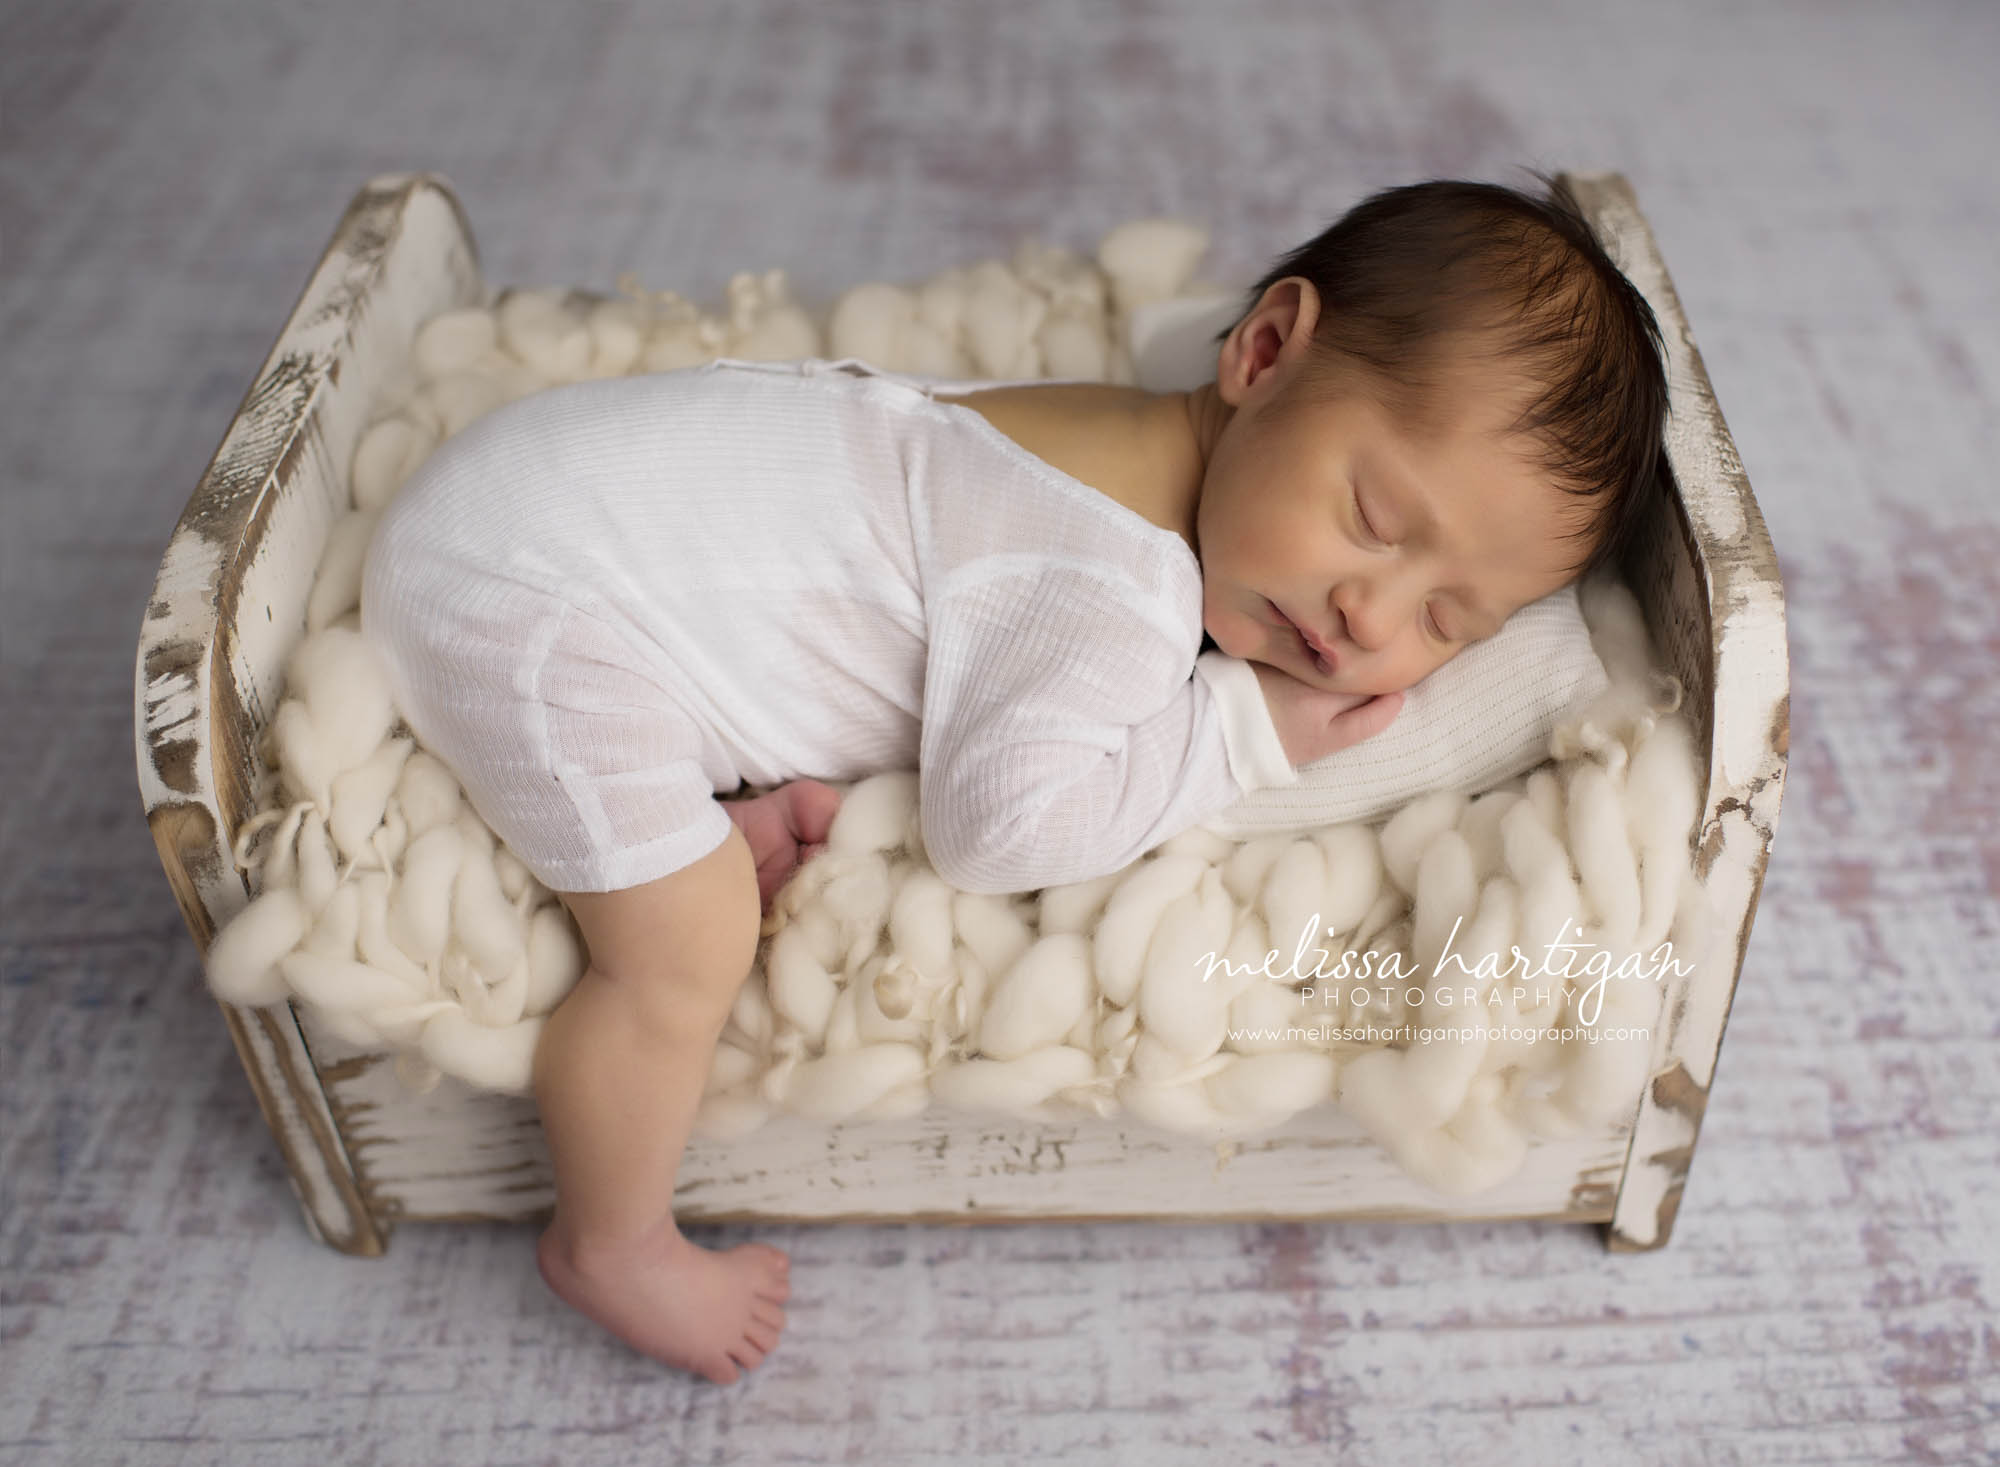 Melissa Hartigan Photography Maternity and Newborn Connecticut Photographer Brayden Mini Newborn Session Baby boy sleeping in antique white bed laying on chunky knit blanket wearing white cotton onesie leg hanging down